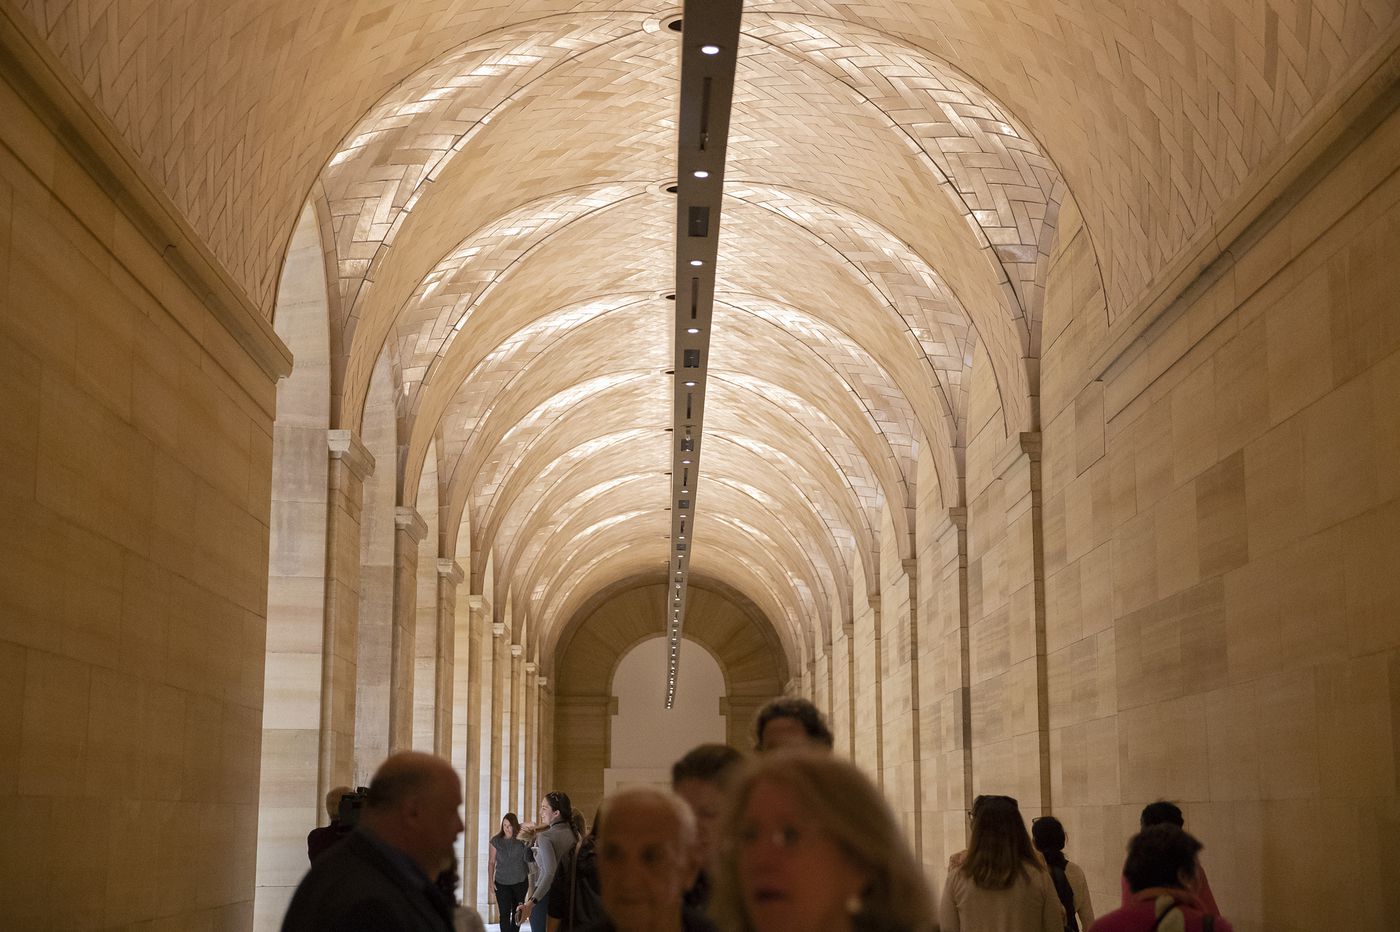 Philadelphia Museum of Art opens its jaw-dropping new entrance — the old vaulted walkway, closed for decades